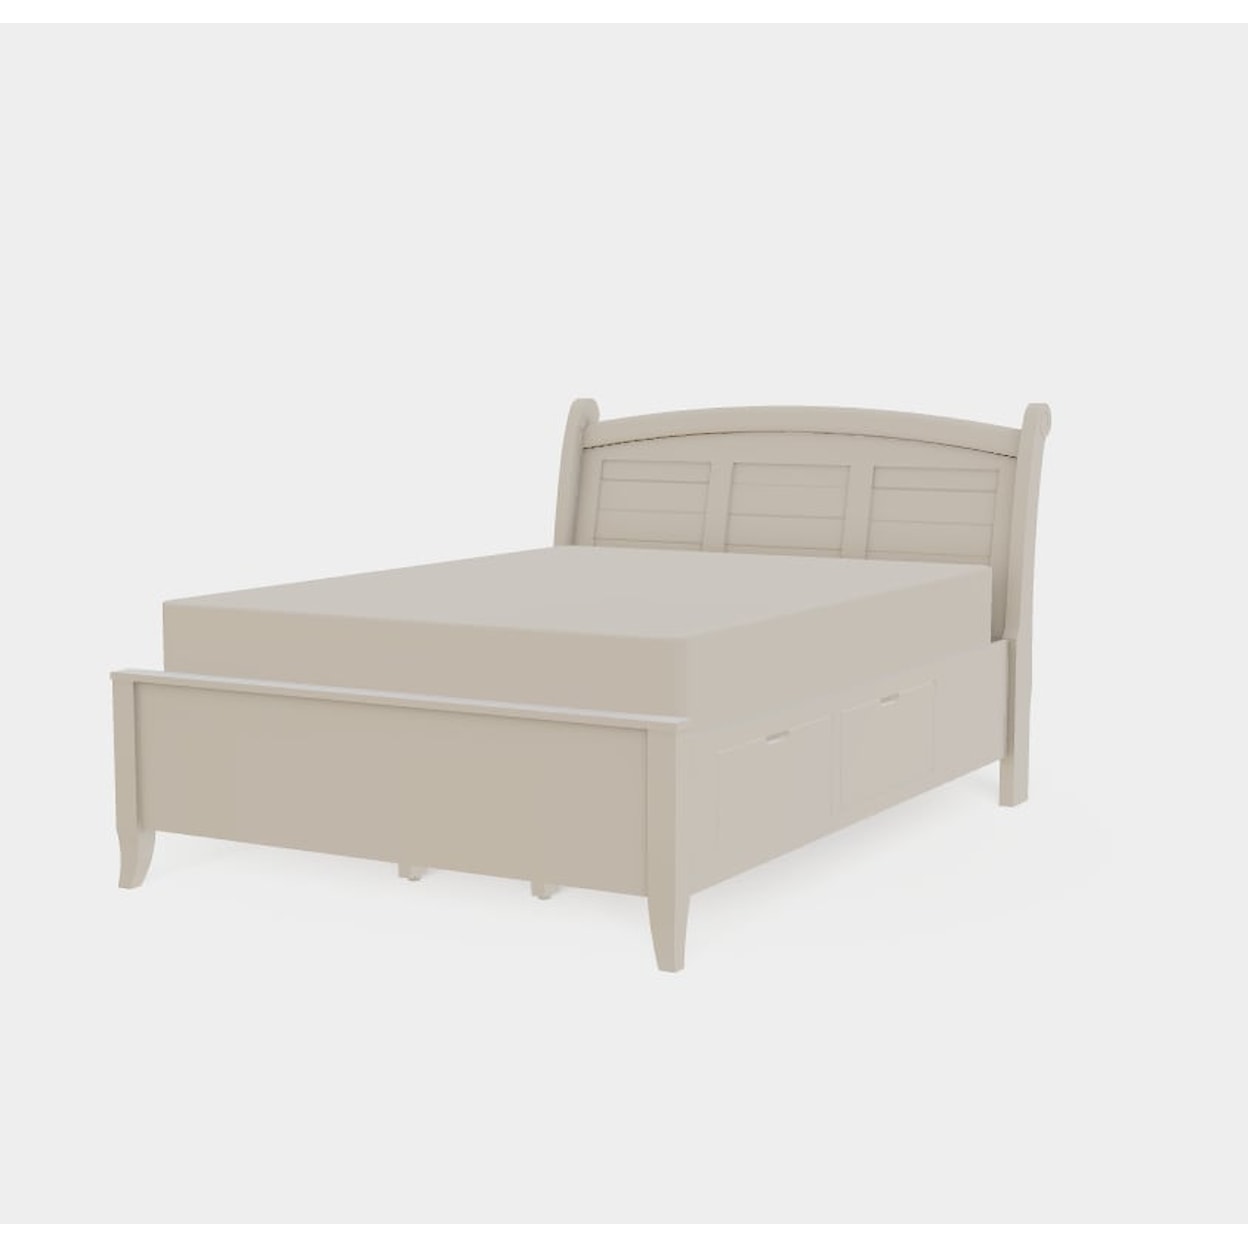 Mavin Tribeca Queen Arched Both Drawerside Bed